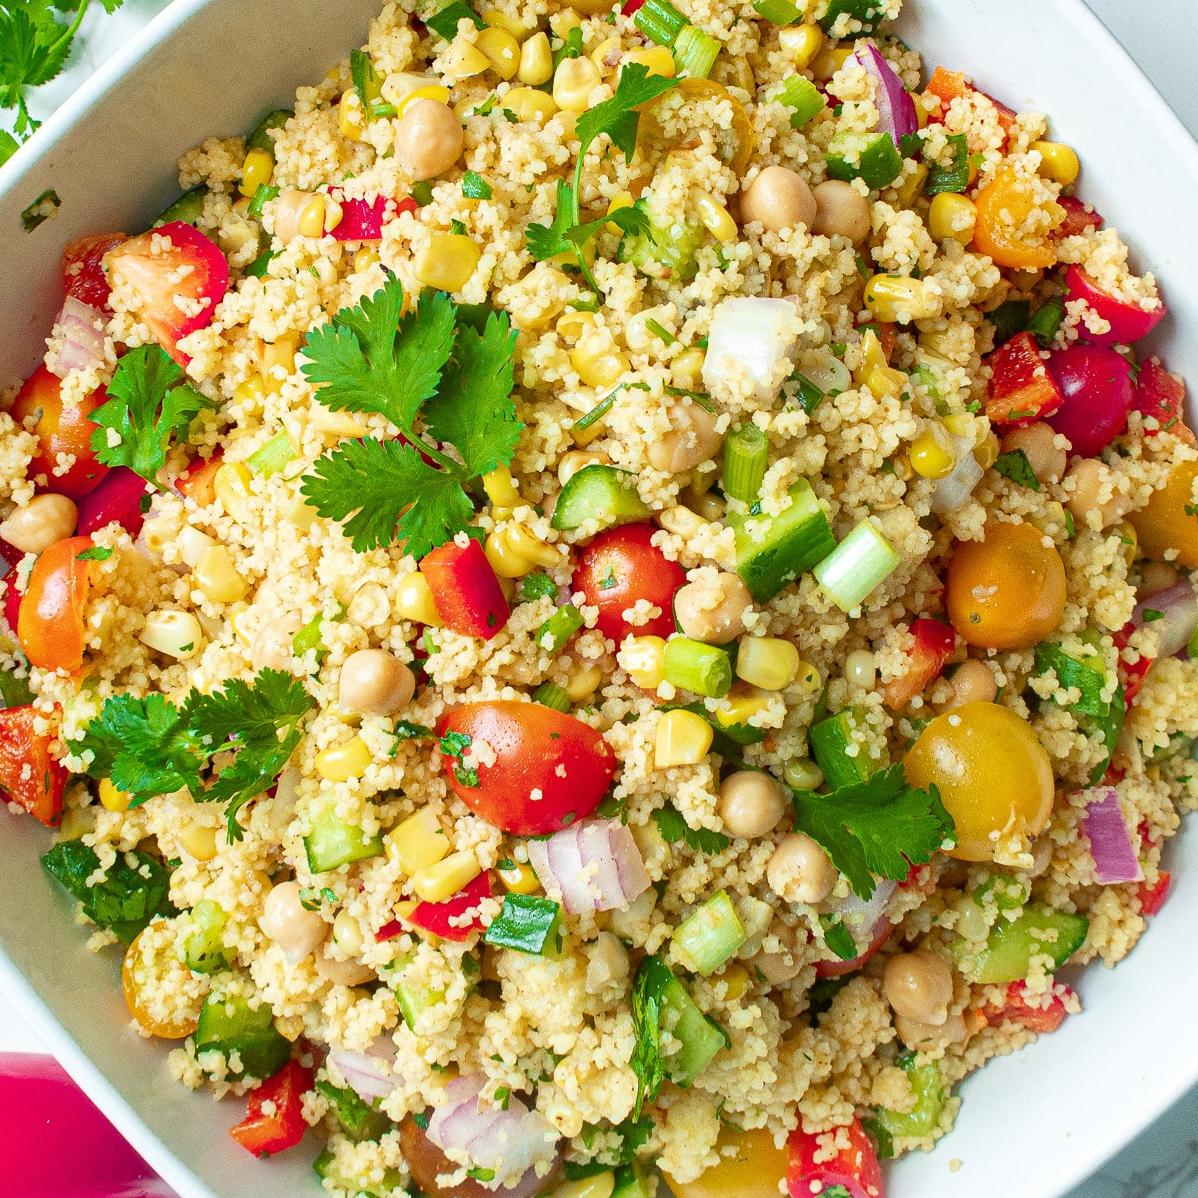  Dive into this vegan-friendly couscous salad that’s full of flavor!